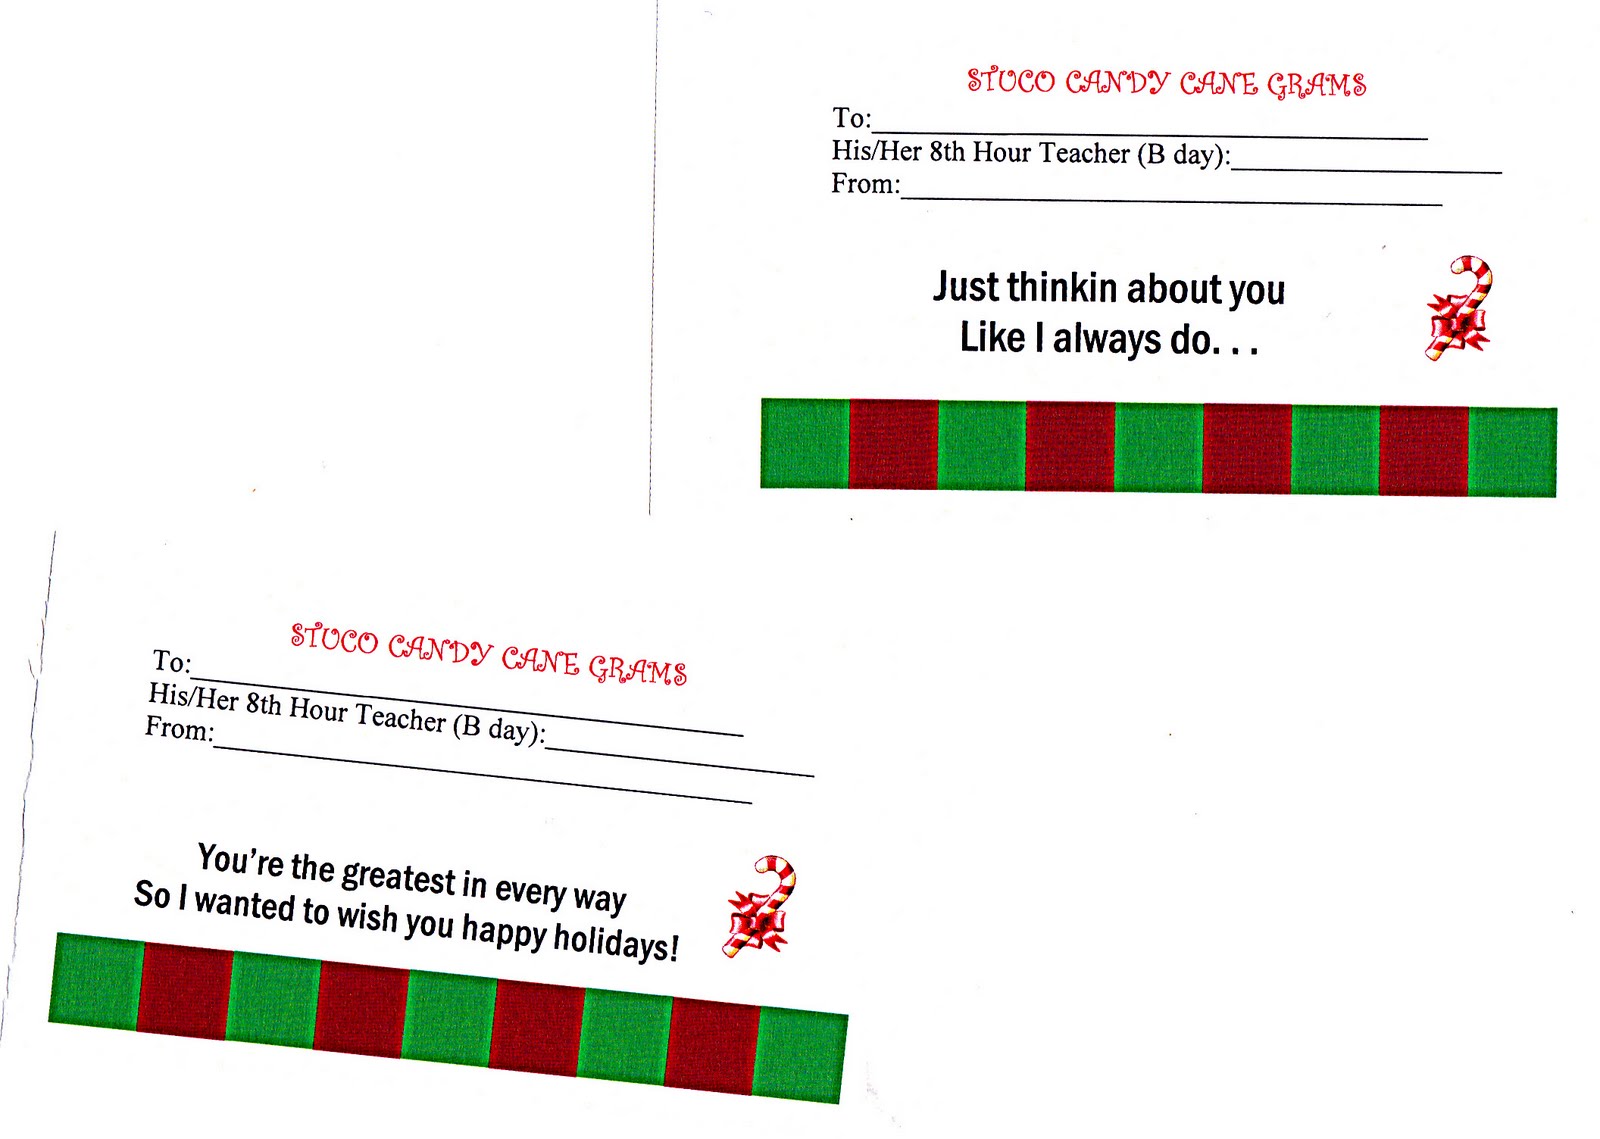 8-best-images-of-printable-candy-cane-gram-templates-candy-cane-gram